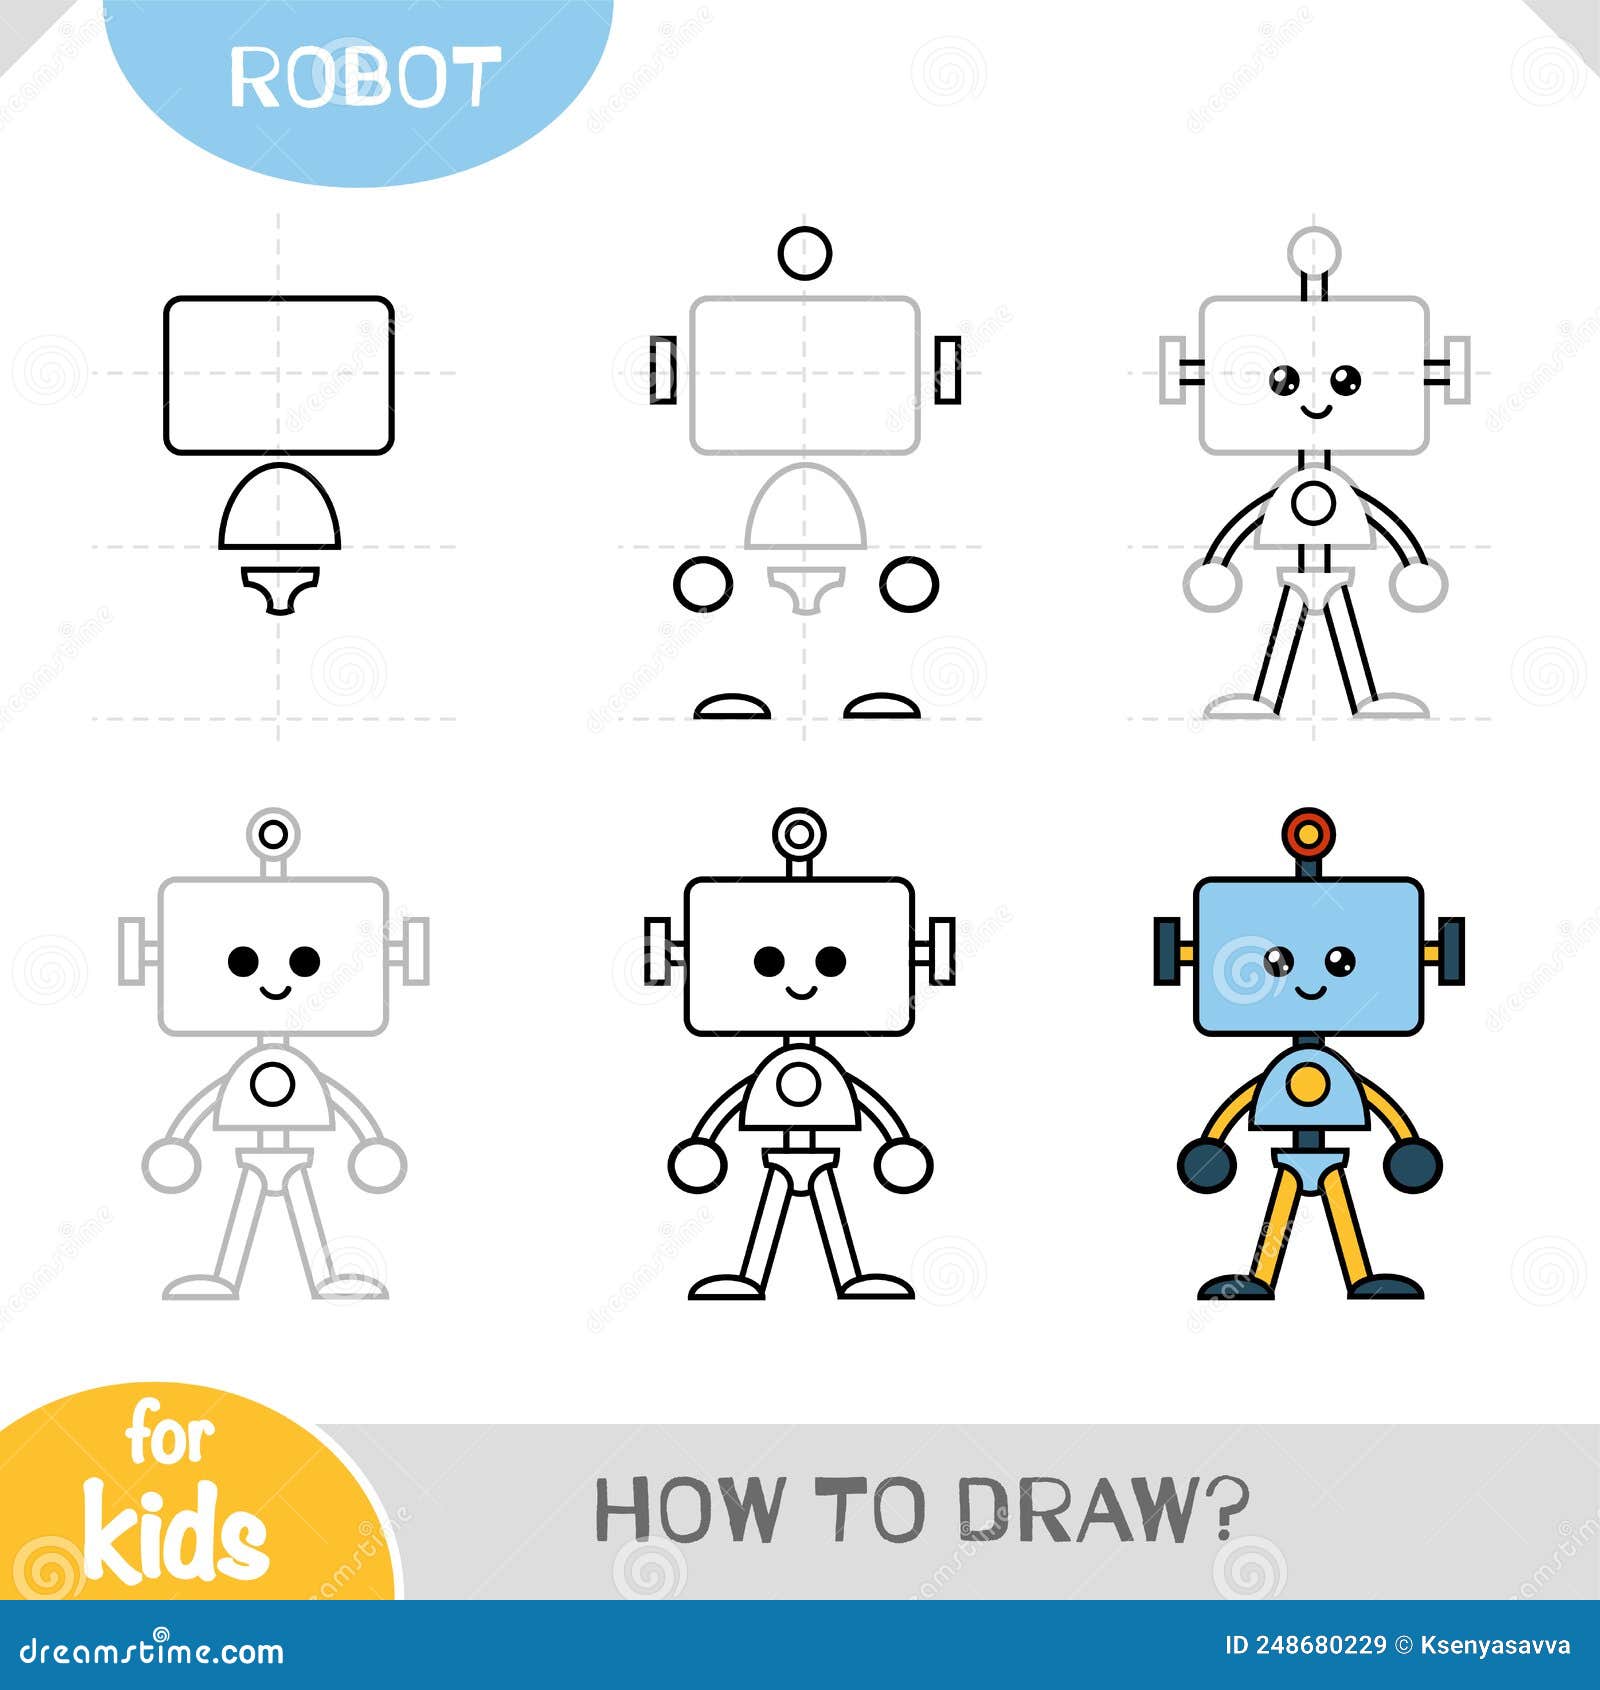 Robot Drawing Tutorial - How to draw Robot step by step